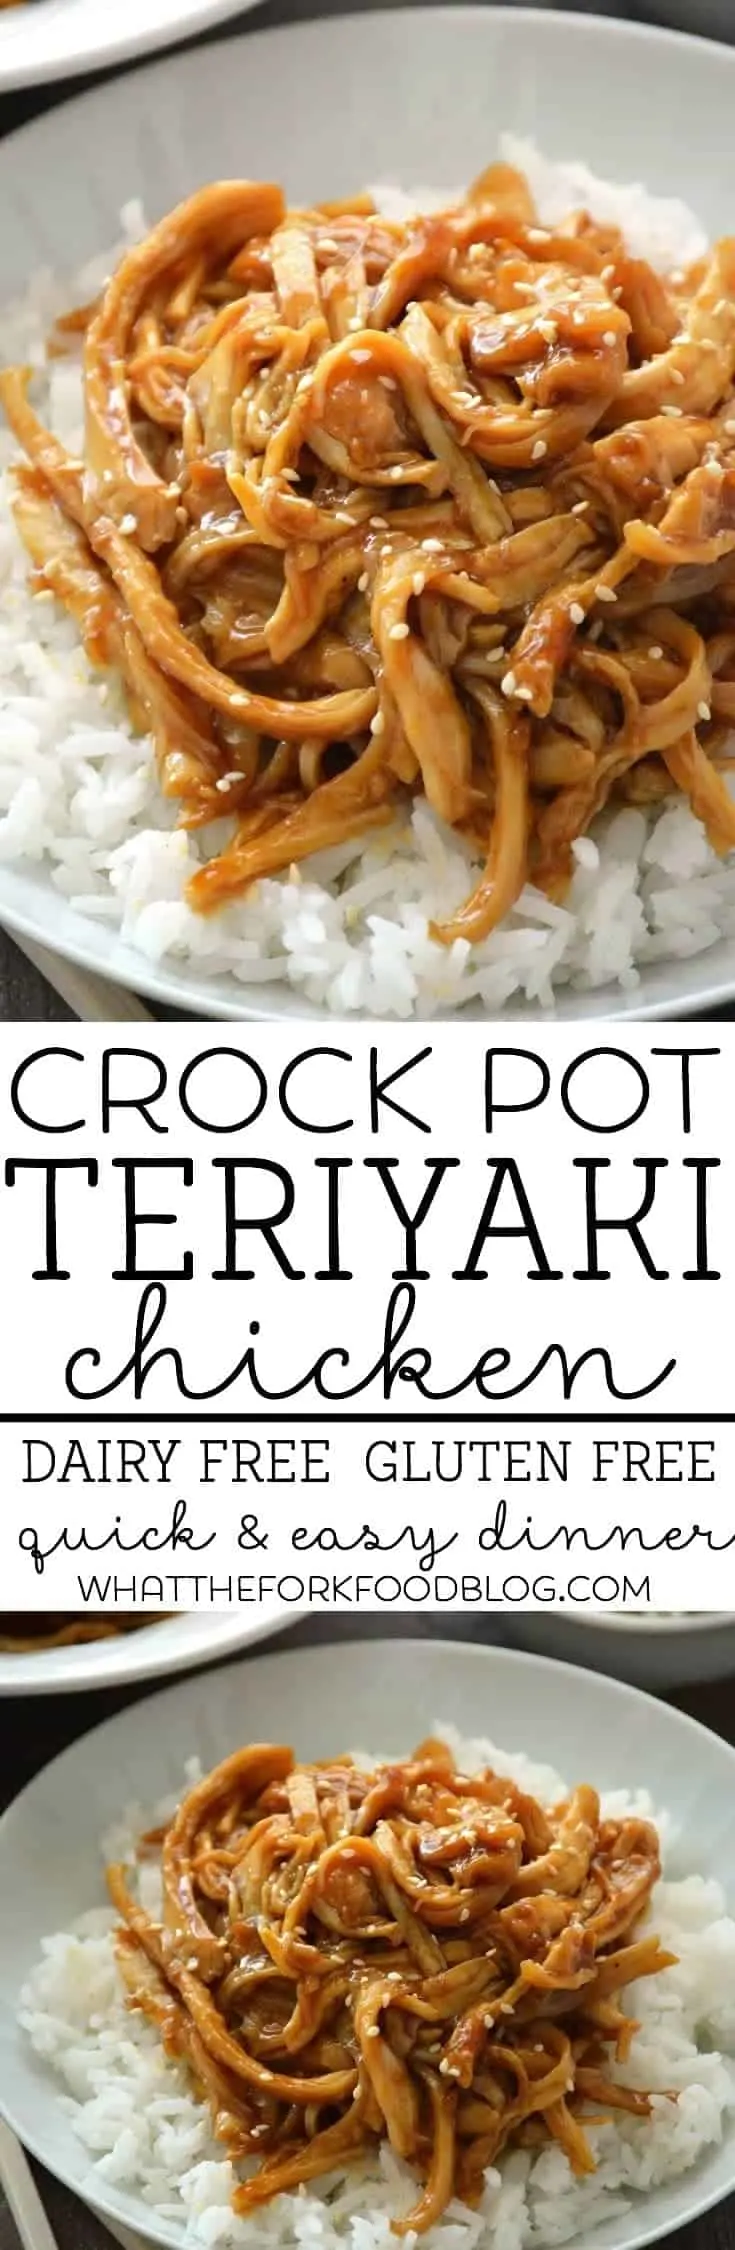 Crock Pot Teriyaki Chicken from What The Fork Food Blog | @WhatTheForkBlog | whattheforkfoodblog.com